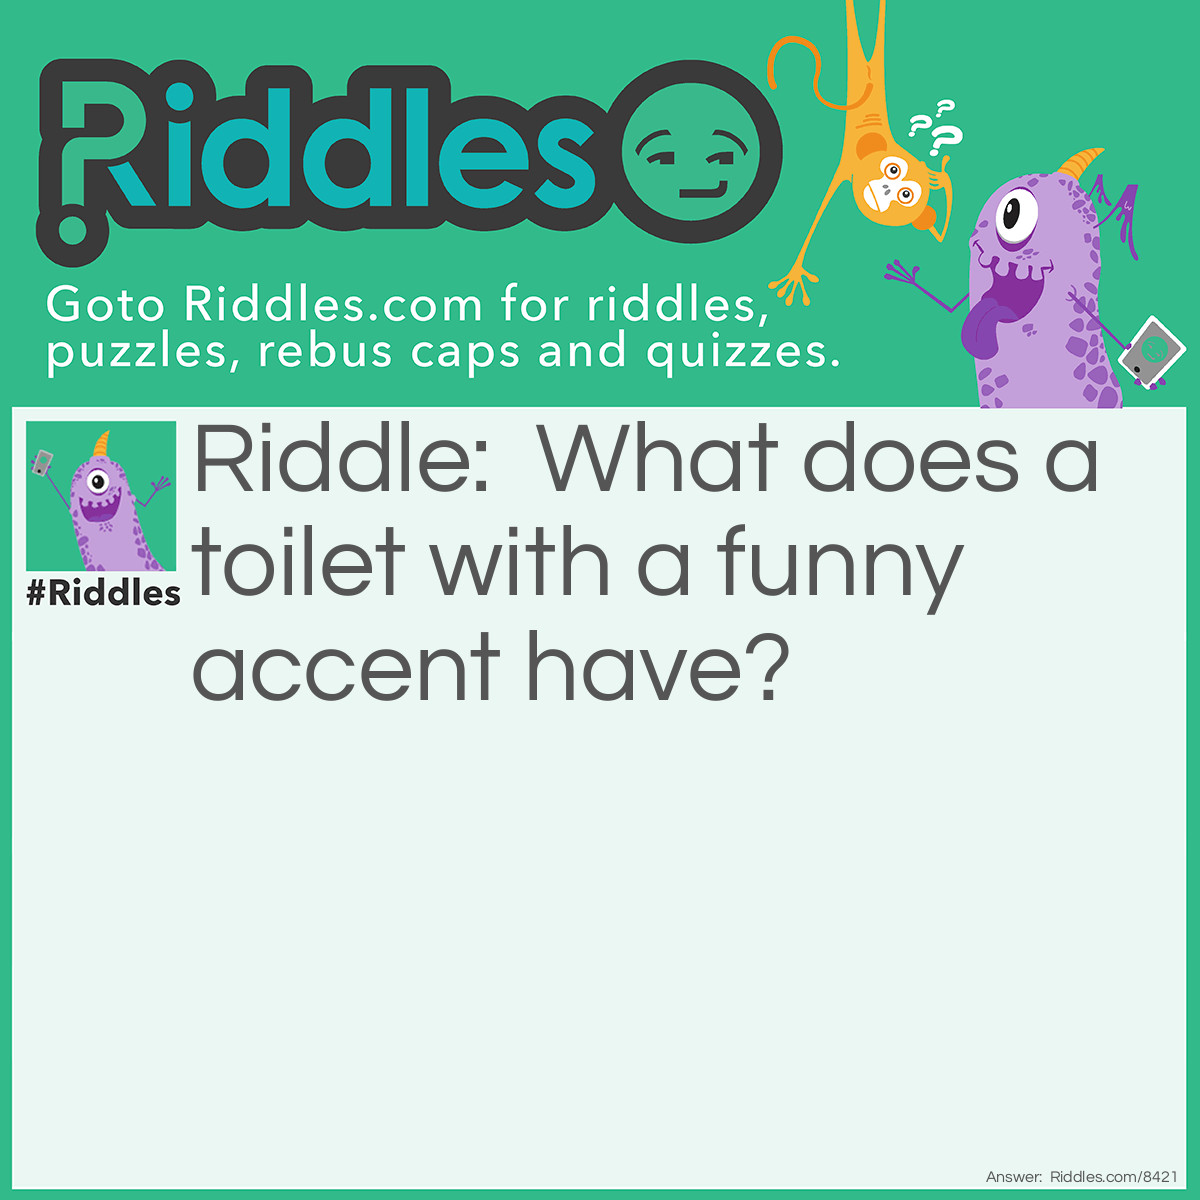 Riddle: What does a toilet with a <a title="Funny Riddles" href="../../../funny-riddles">funny</a> accent have? Answer: Irritable vowel syndrome!